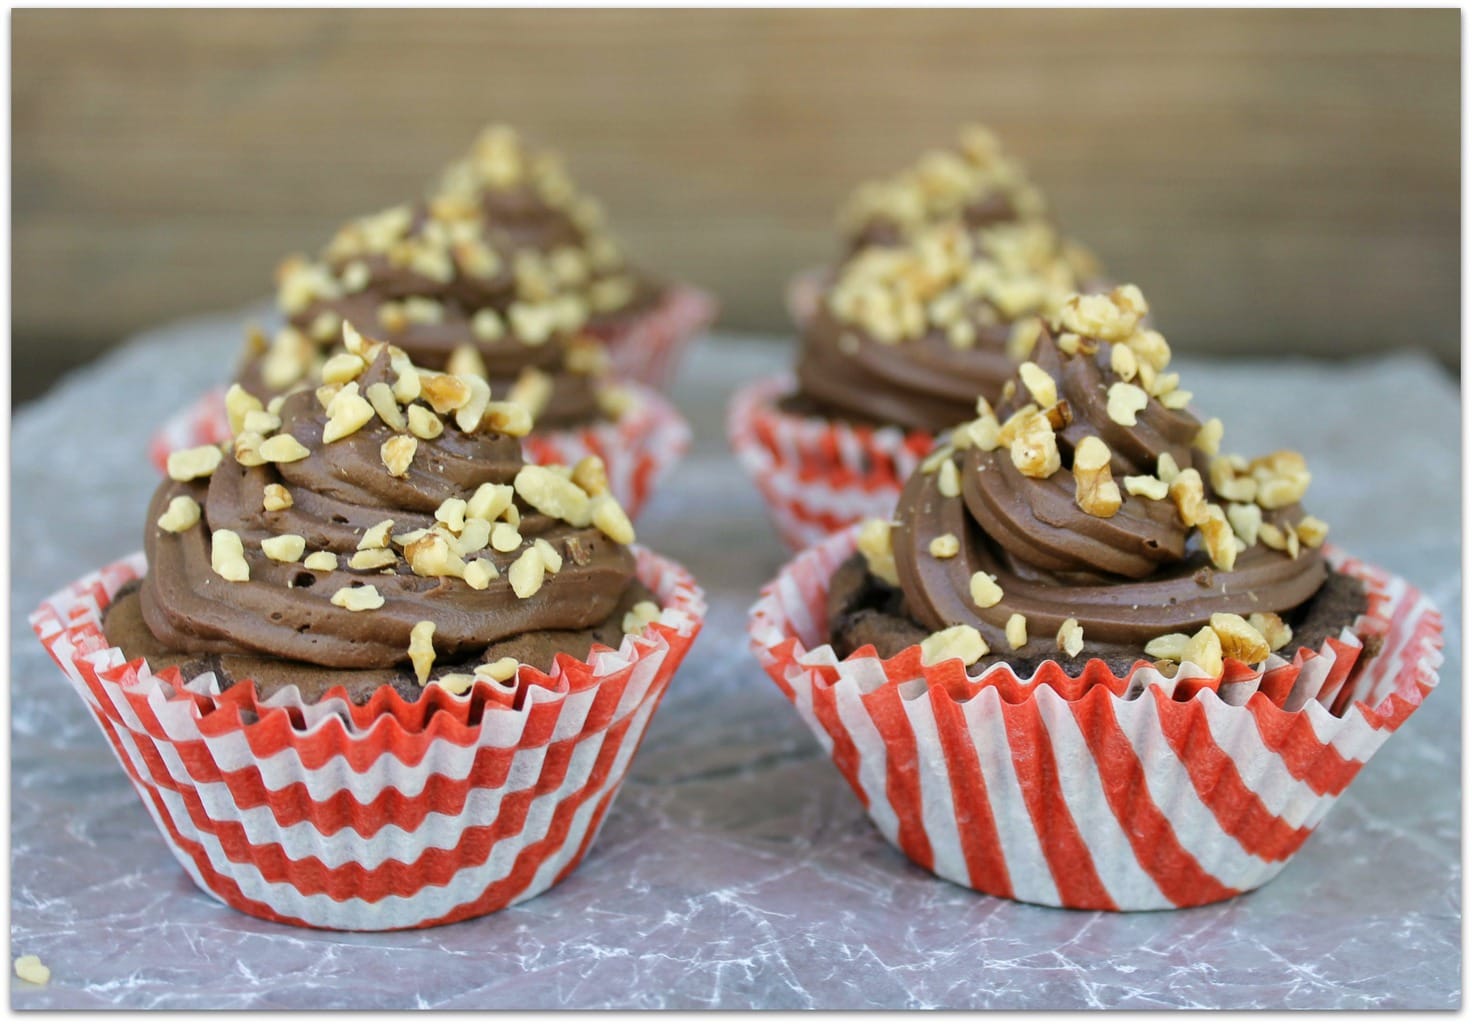 These Banana Nut Fudge Brownie Cupcakes are the perfect snack for after school. They also make a great dessert to serve after dinner or bring to parties.